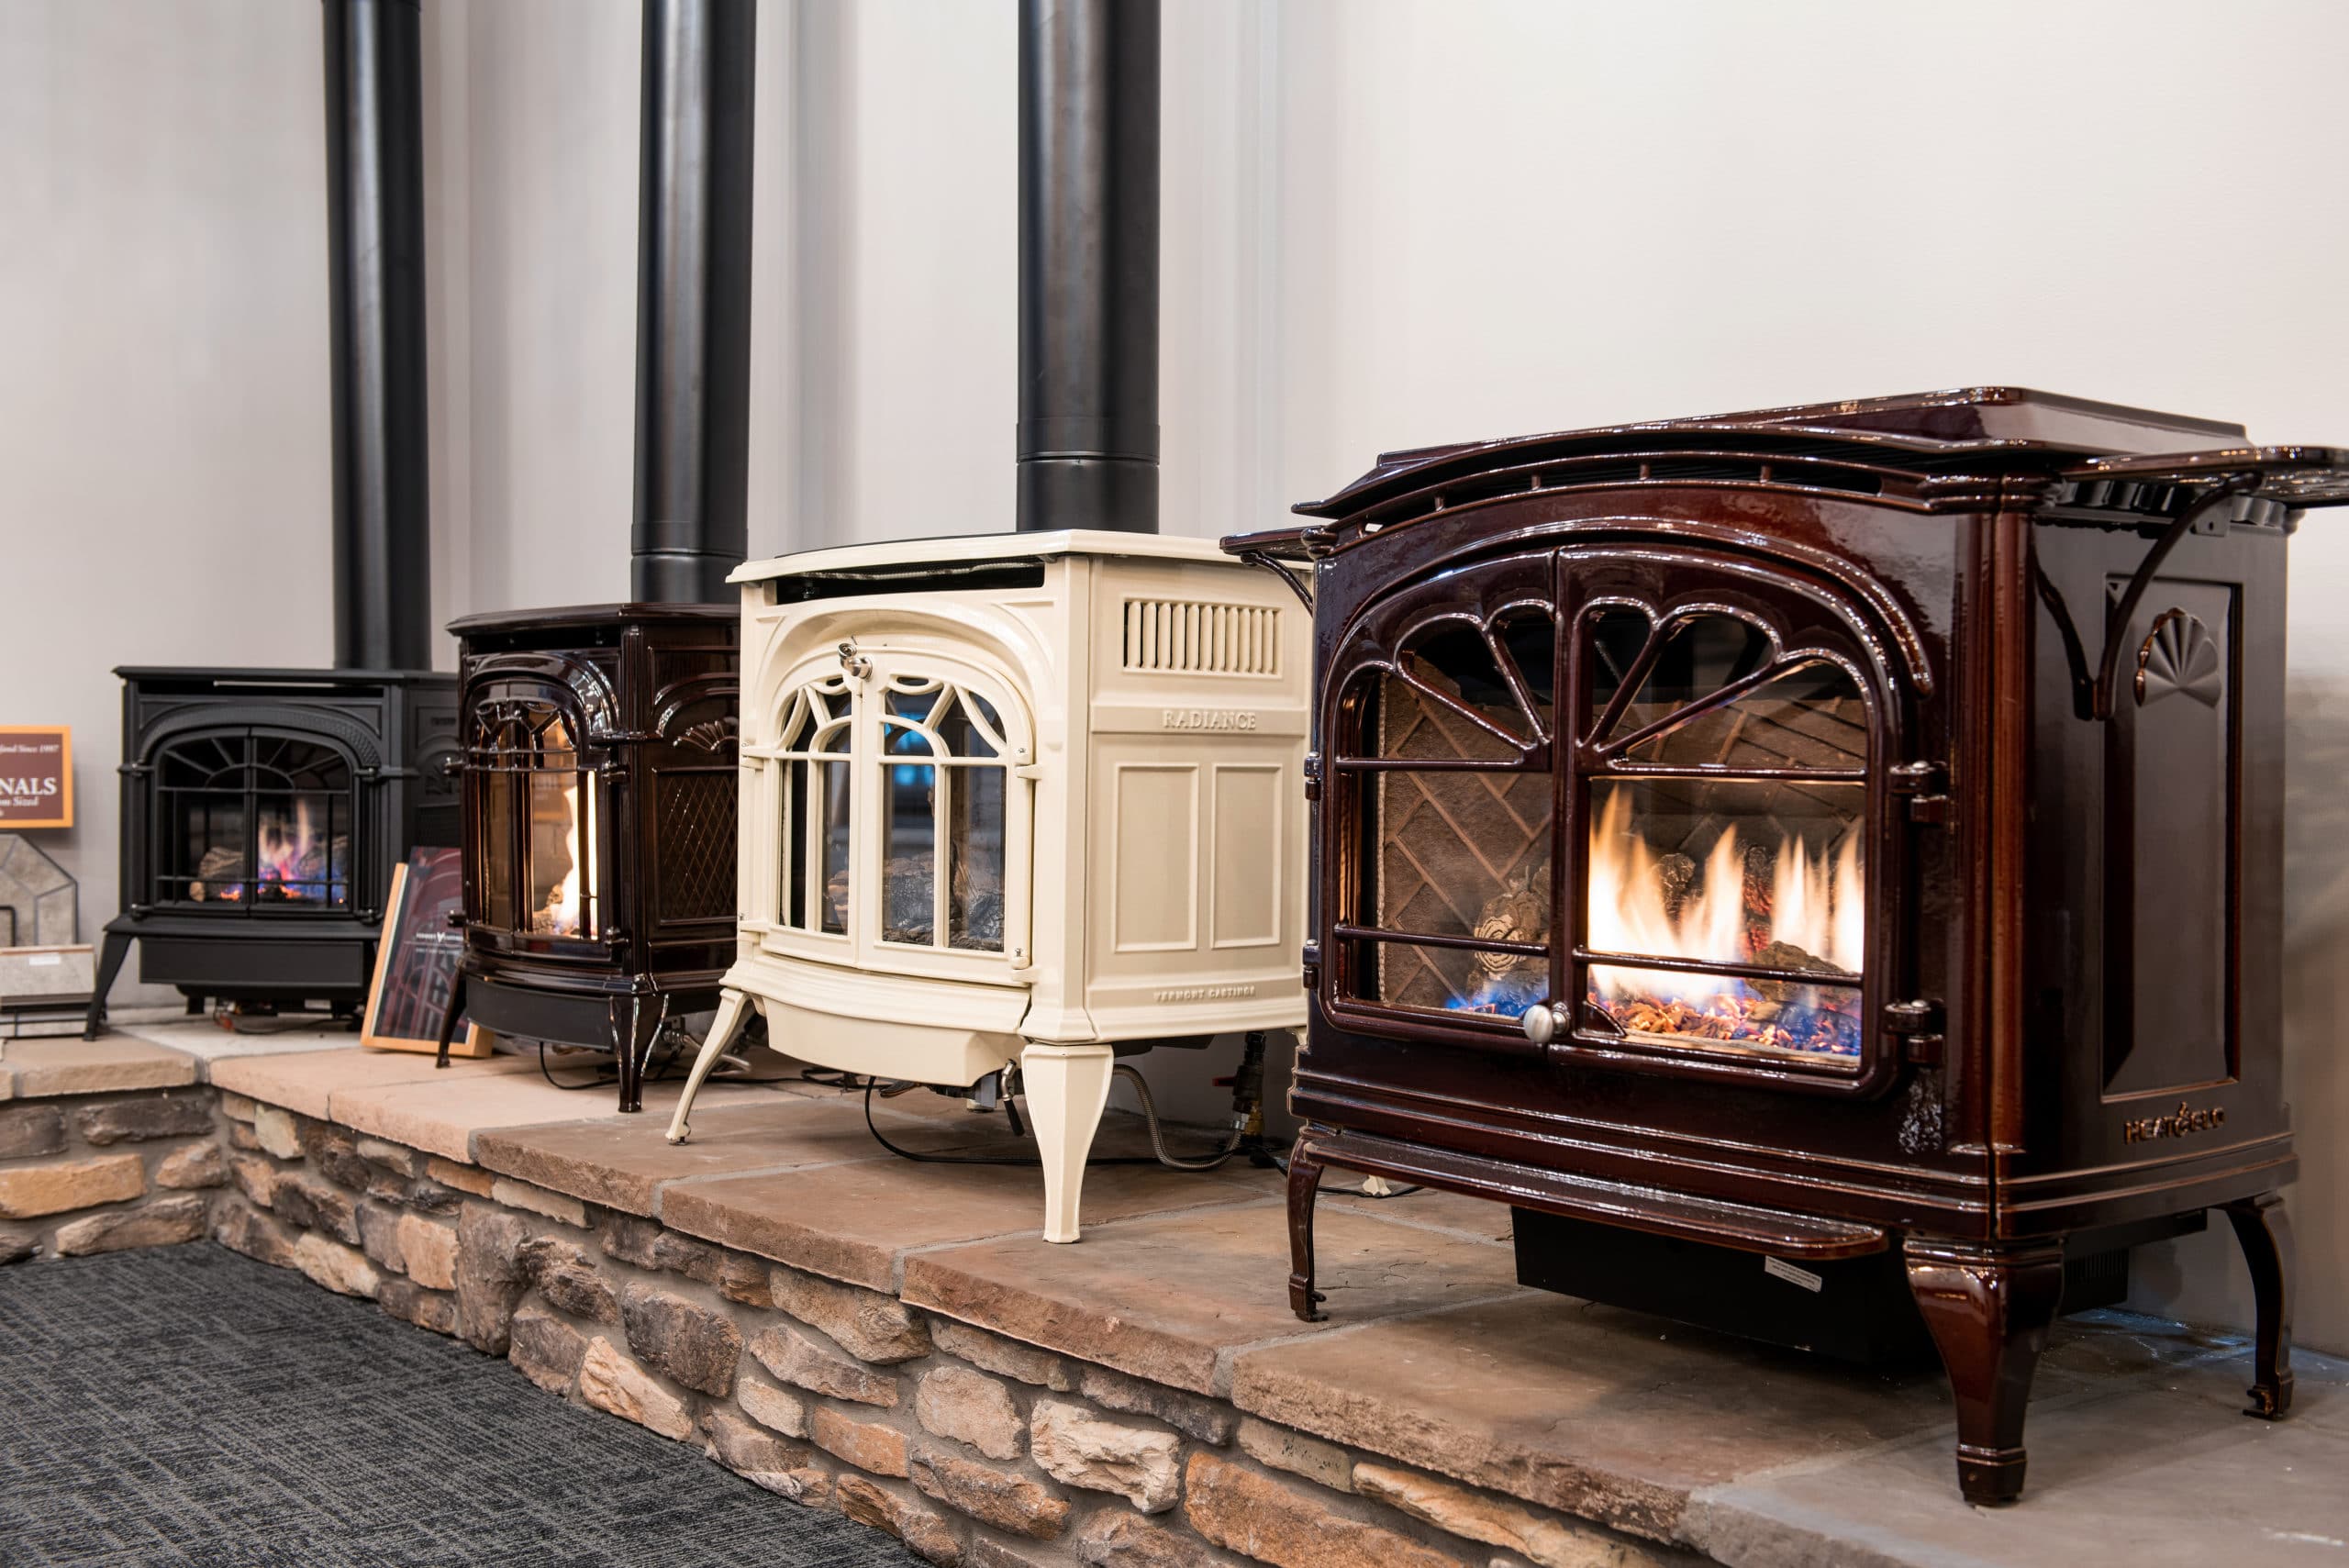 Cast iron stoves, fireplaces, and mangle in Cregneash, Isle of Man